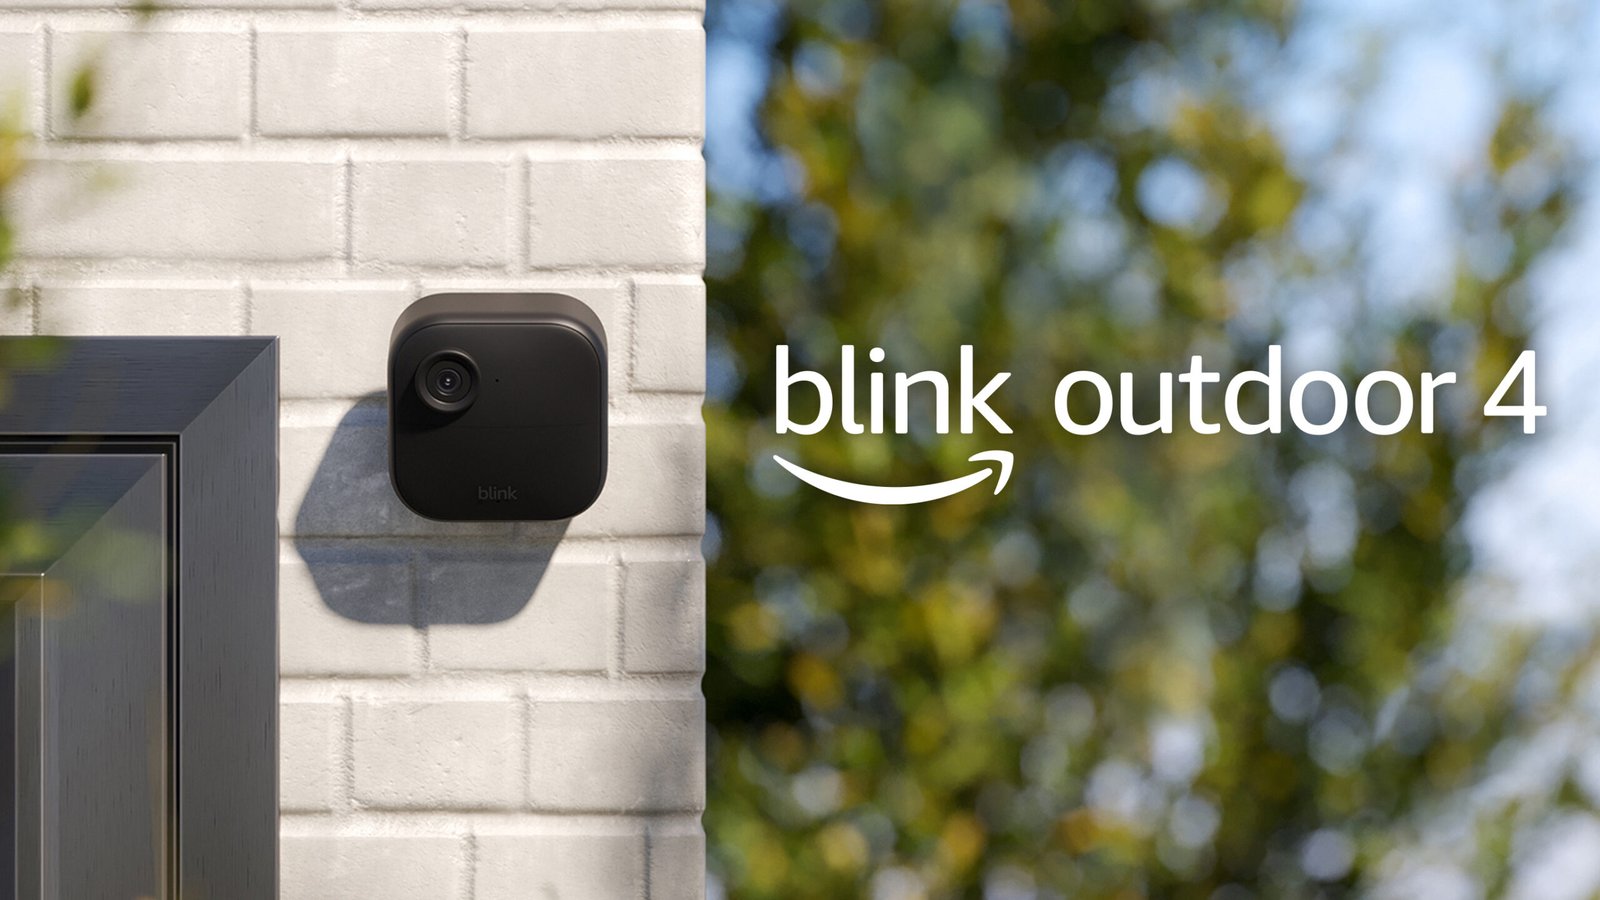 Save $207 on four Blink Outdoor 4 security cameras